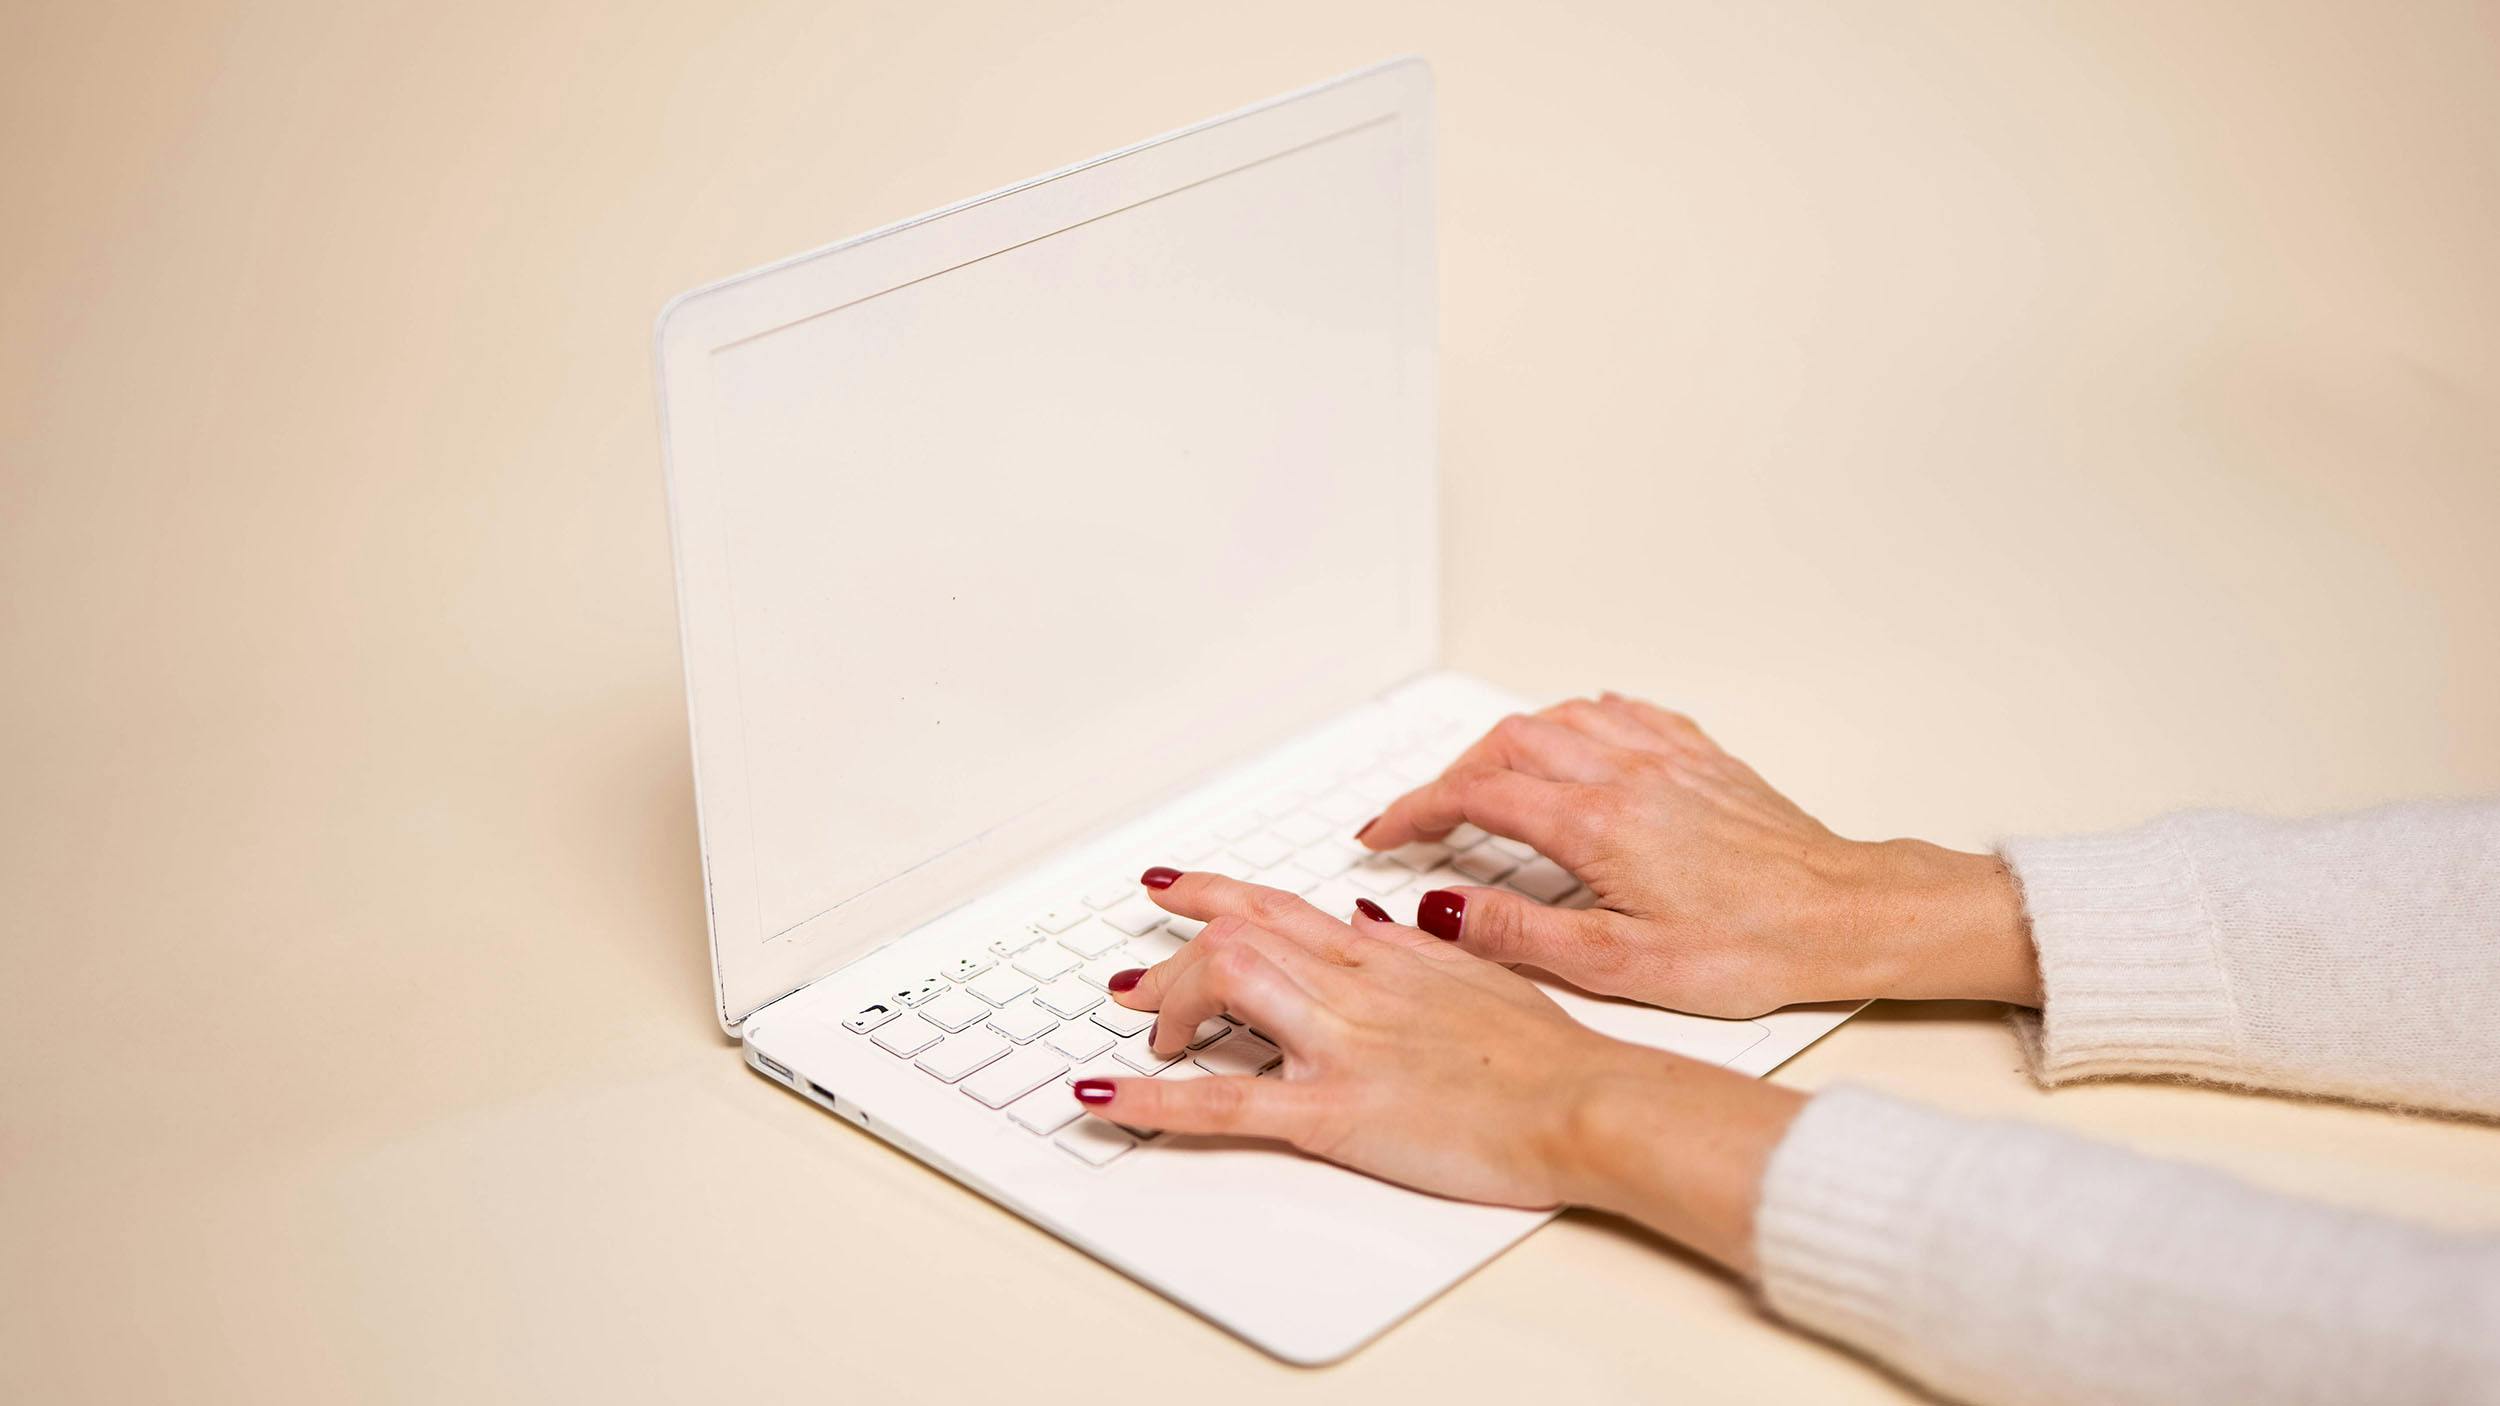 Hands on the keyboard of a painted laptop.